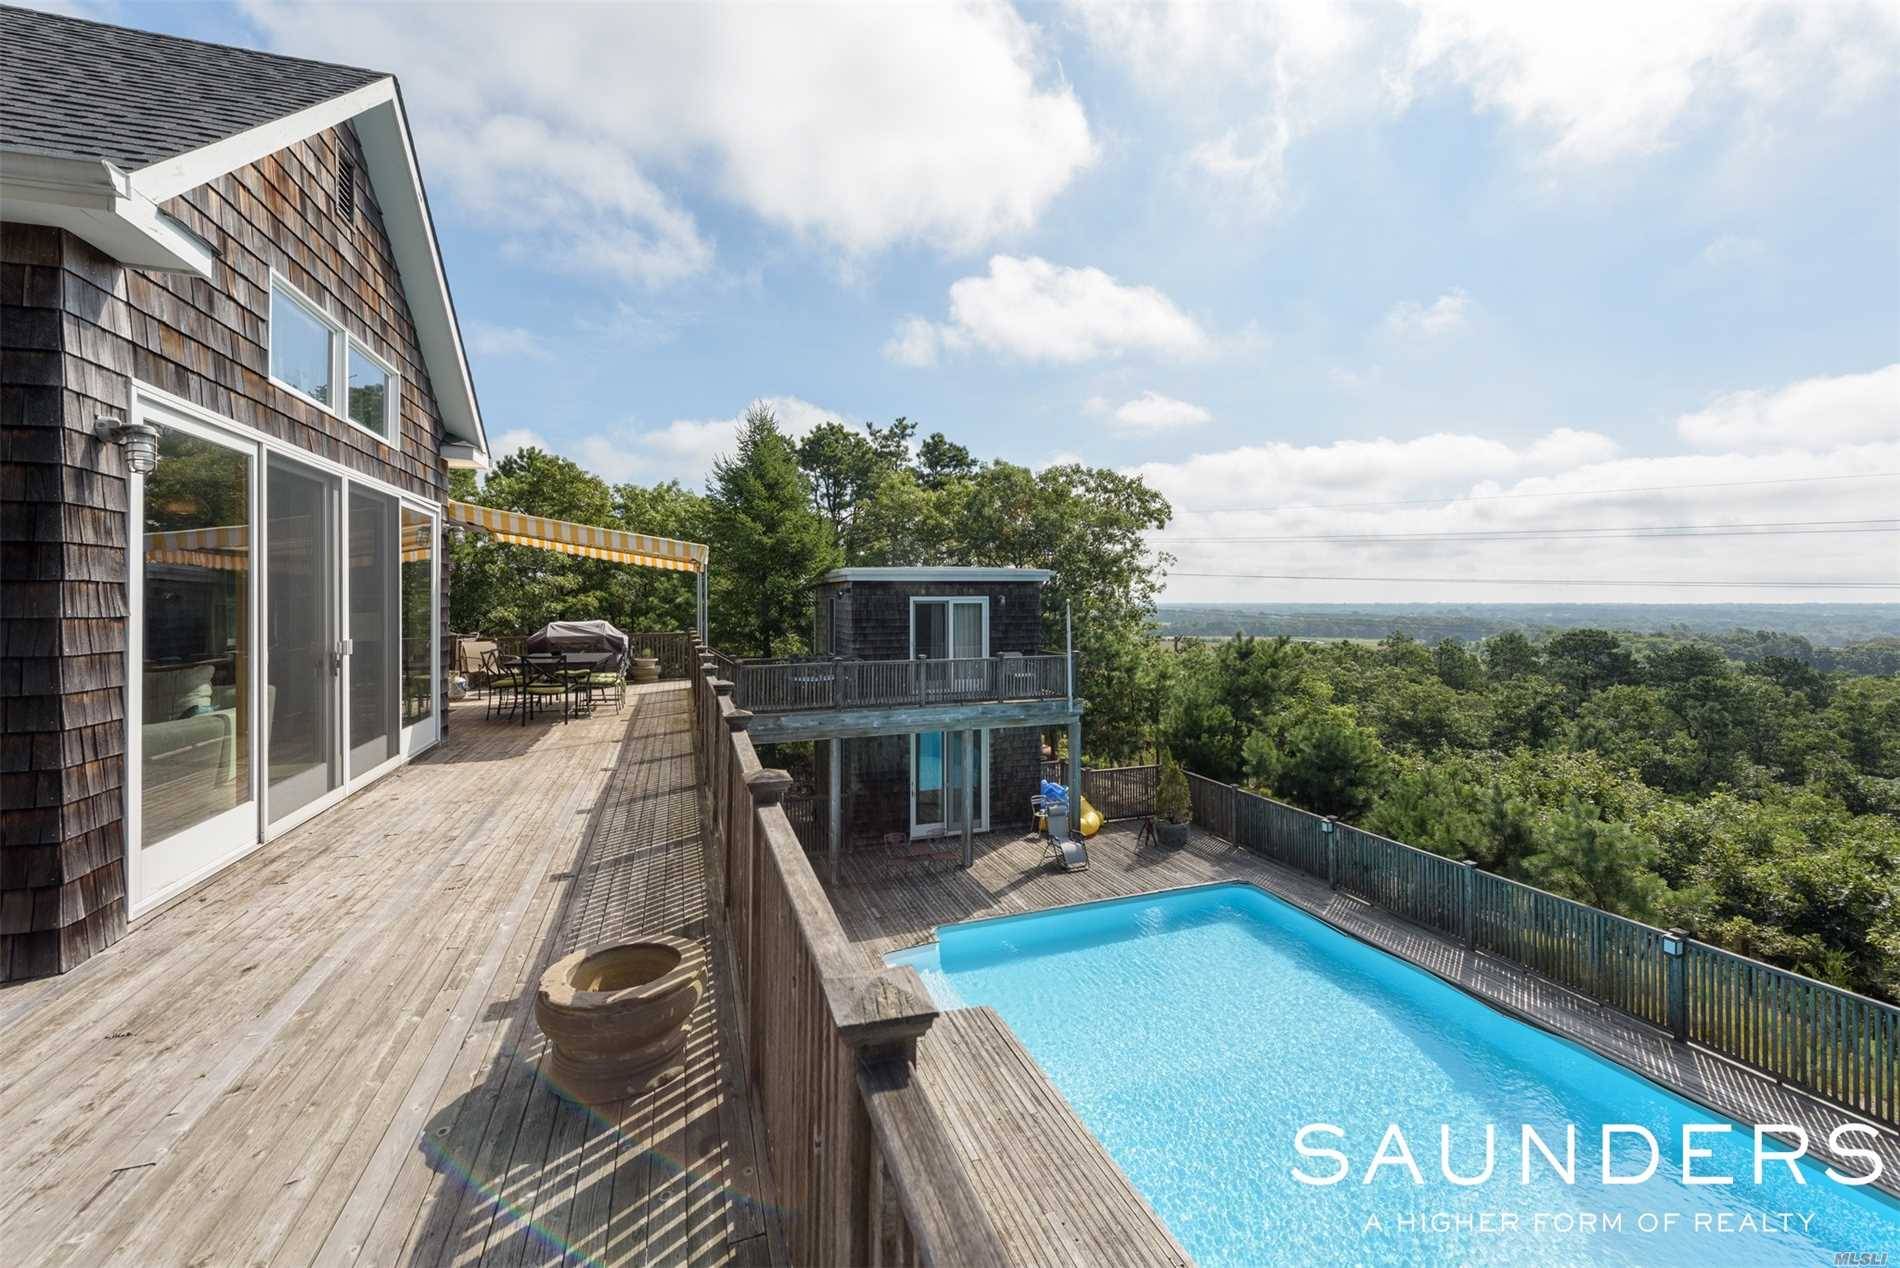 Set On One Of The Highest Points In The Hamptons, Overlooking Bridgehampton, Enjoy A Fabulous Scenic View Of Farmfields Stretching To The Atlantic Ocean.